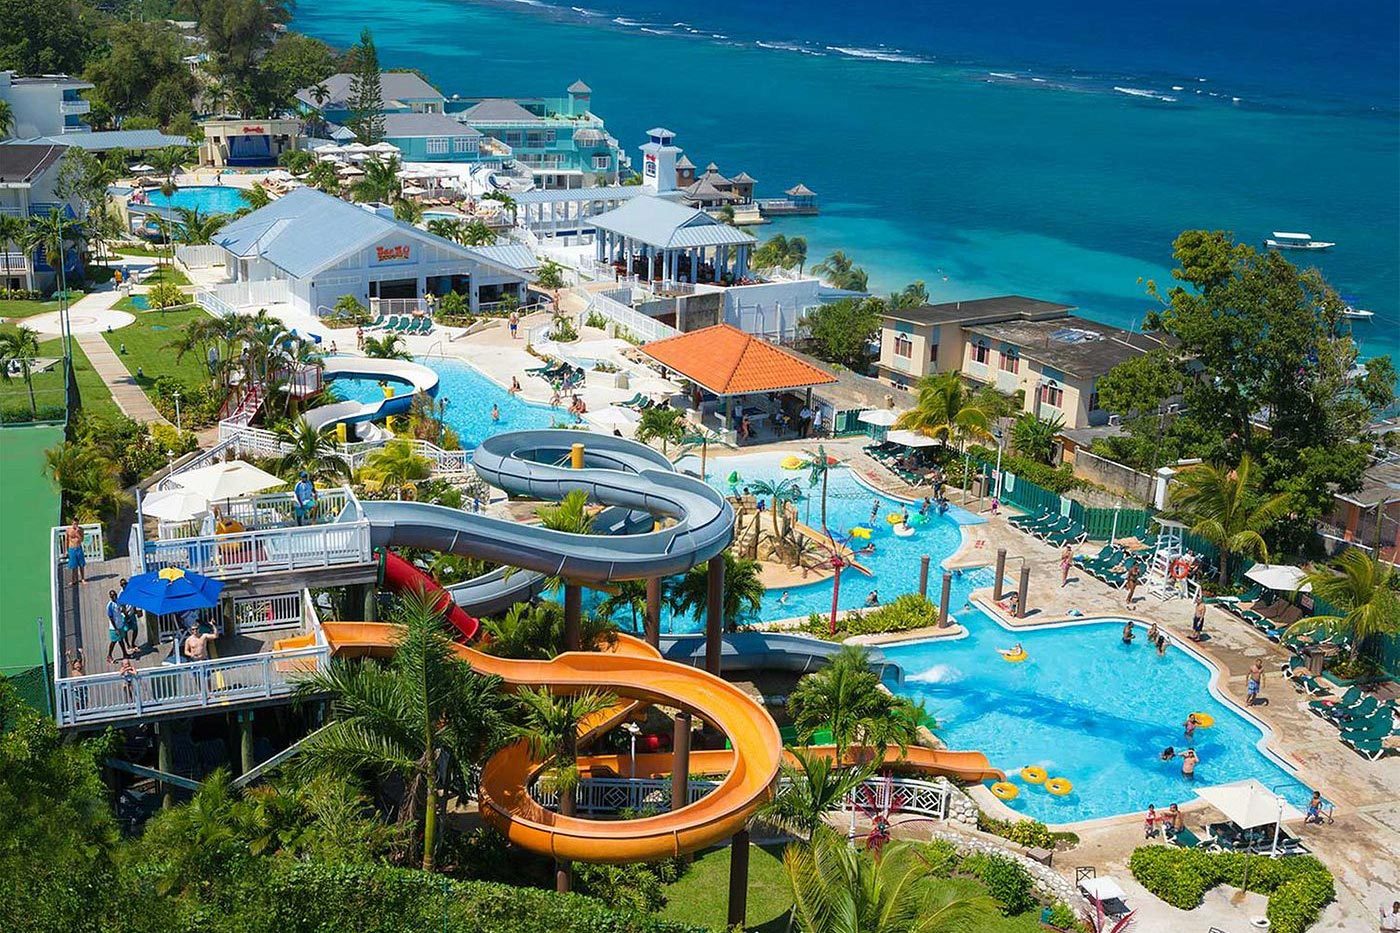 <h3>Beaches Ocho Rios, Jamaica</h3> <p>Traveling with autistic children can be challenging, but with some help and support, it's far from impossible. <a href="https://www.tripadvisor.com/Hotel_Review-g1993121-d148874-Reviews-Beaches_Ocho_Rios_Resort_Golf_Club-Boscobel_Saint_Mary_Parish_Jamaica.html" rel="noopener noreferrer">This Jamaican property</a> is part of the Beaches brand—the family arm of honeymoon favorite Sandals—which is the first resort company in the world to complete the rigorous training required to offer <a href="https://www.rd.com/article/beaches-autism-friendly-resort/">autism-friendly, fully staffed kids camps</a> at no additional cost. It even hosts a tailored Autism All-Inclusive Week each year.</p> <p>One of the cheapest all-inclusive resorts, it features sensory-friendly spaces, attention to dietary modifications, advanced autism-certification-holding water sports, a PADI scuba diving certification, a marine park and a kids' camp. The optional one-on-one Beach Buddies program offers an even more tailored experience, and the Sesame Street partnership is universally beloved. Extra-large standard rooms provide space for a family to stretch out.</p> <p><strong>Pros:</strong></p> <ul> <li>A certified autism center with an advanced designation</li> <li>Great loyalty program for future discounts</li> <li>Sesame Street partnership</li> </ul> <p><strong>Con:</strong></p> <ul> <li>Prices may run higher</li> </ul> <p class="listicle-page__cta-button-shop"><a class="shop-btn" href="https://www.tripadvisor.com/Hotel_Review-g1993121-d148874-Reviews-Beaches_Ocho_Rios_Resort_Golf_Club-Boscobel_Saint_Mary_Parish_Jamaica.html">Book Now</a></p>